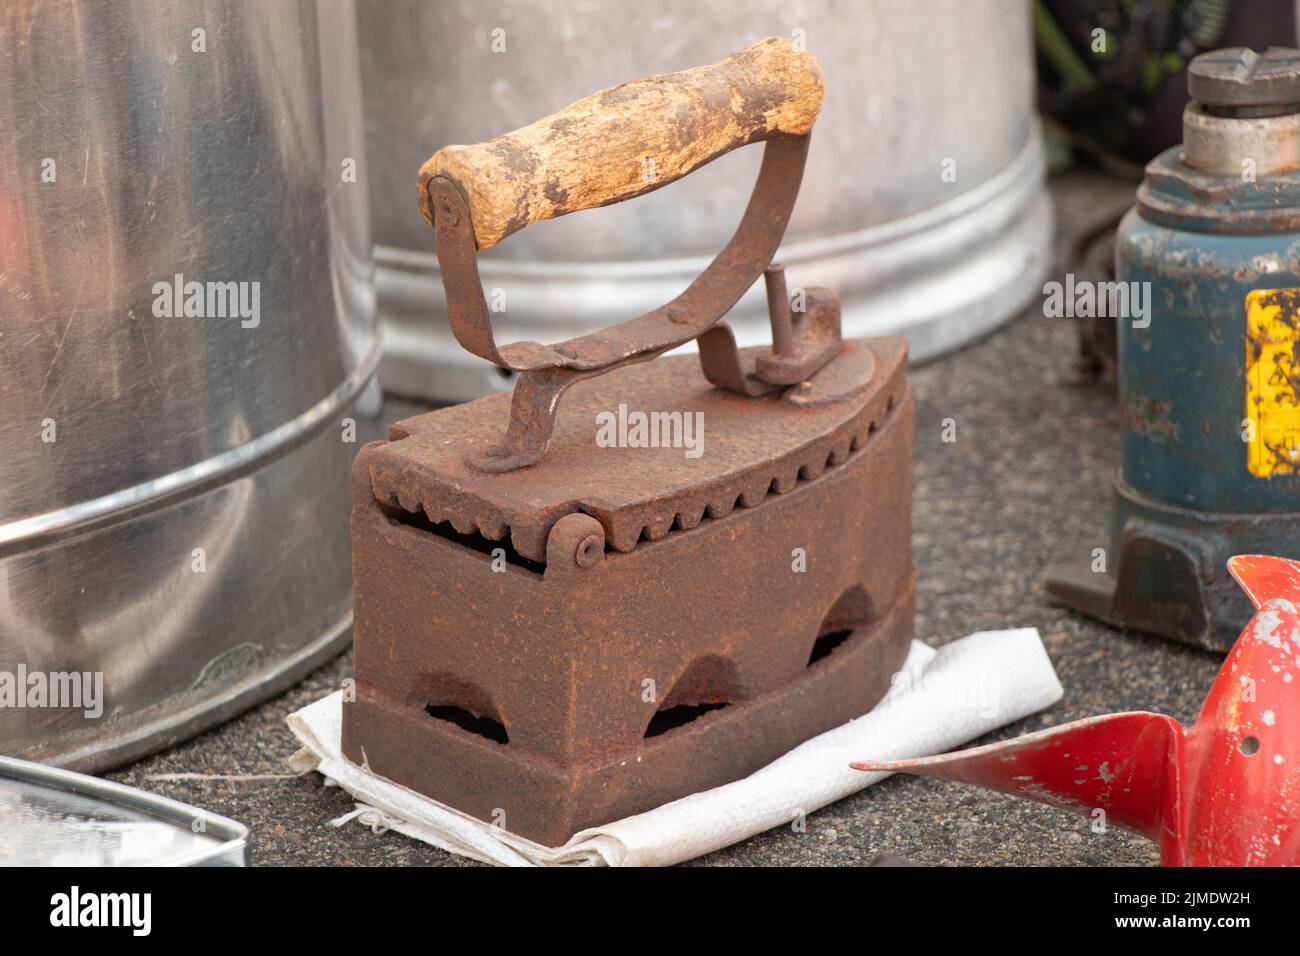 old rusty iron for hot coals, vintage iron for ironing clothes, dry cleaning and laundry, antiques Stock Photo